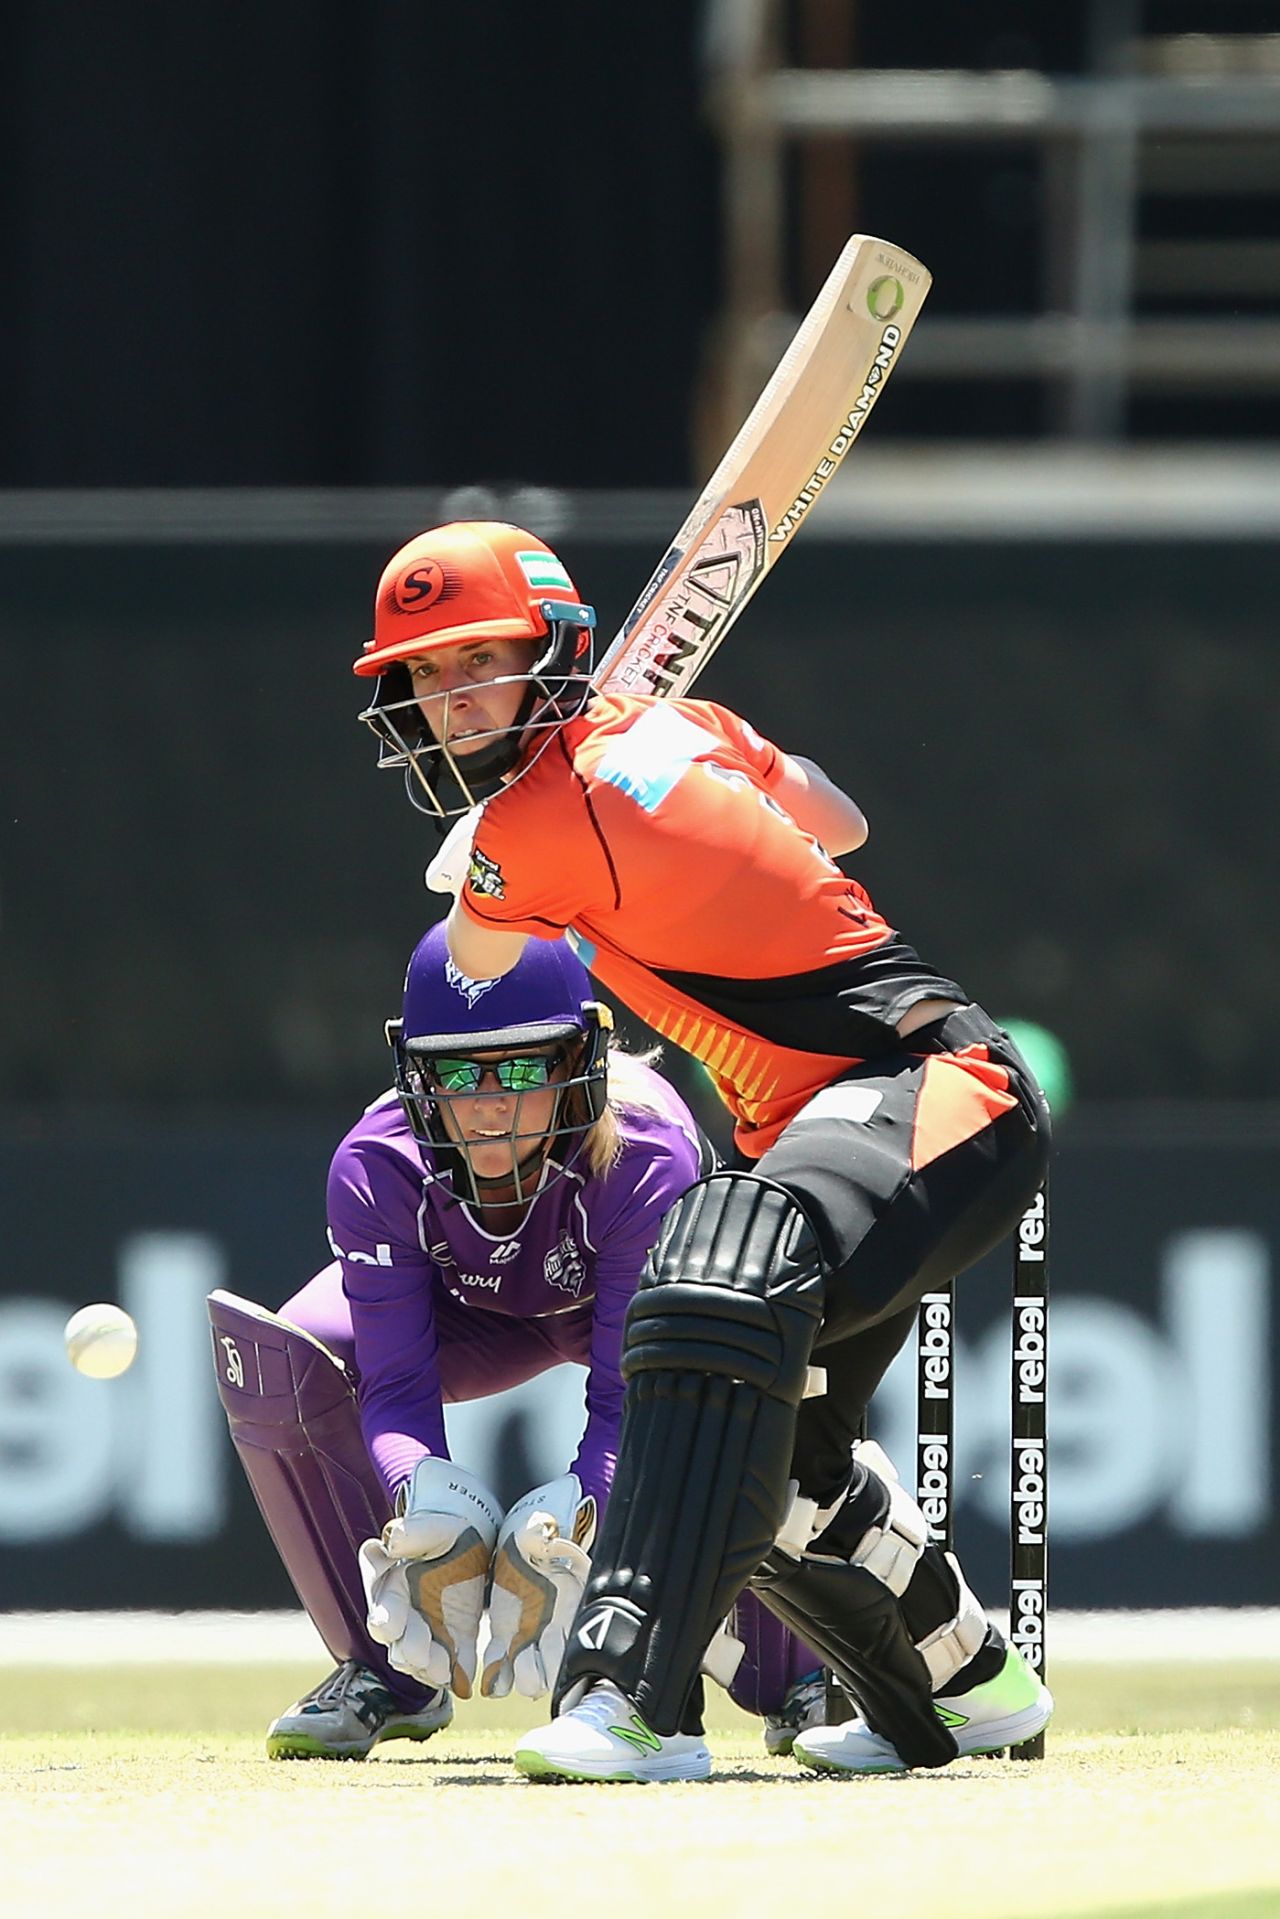 Elyse Villani watches the ball closely, Hobart Hurricanes v Perth Scorchers, WBBL 2019-19, Melbourne, December 1, 2018